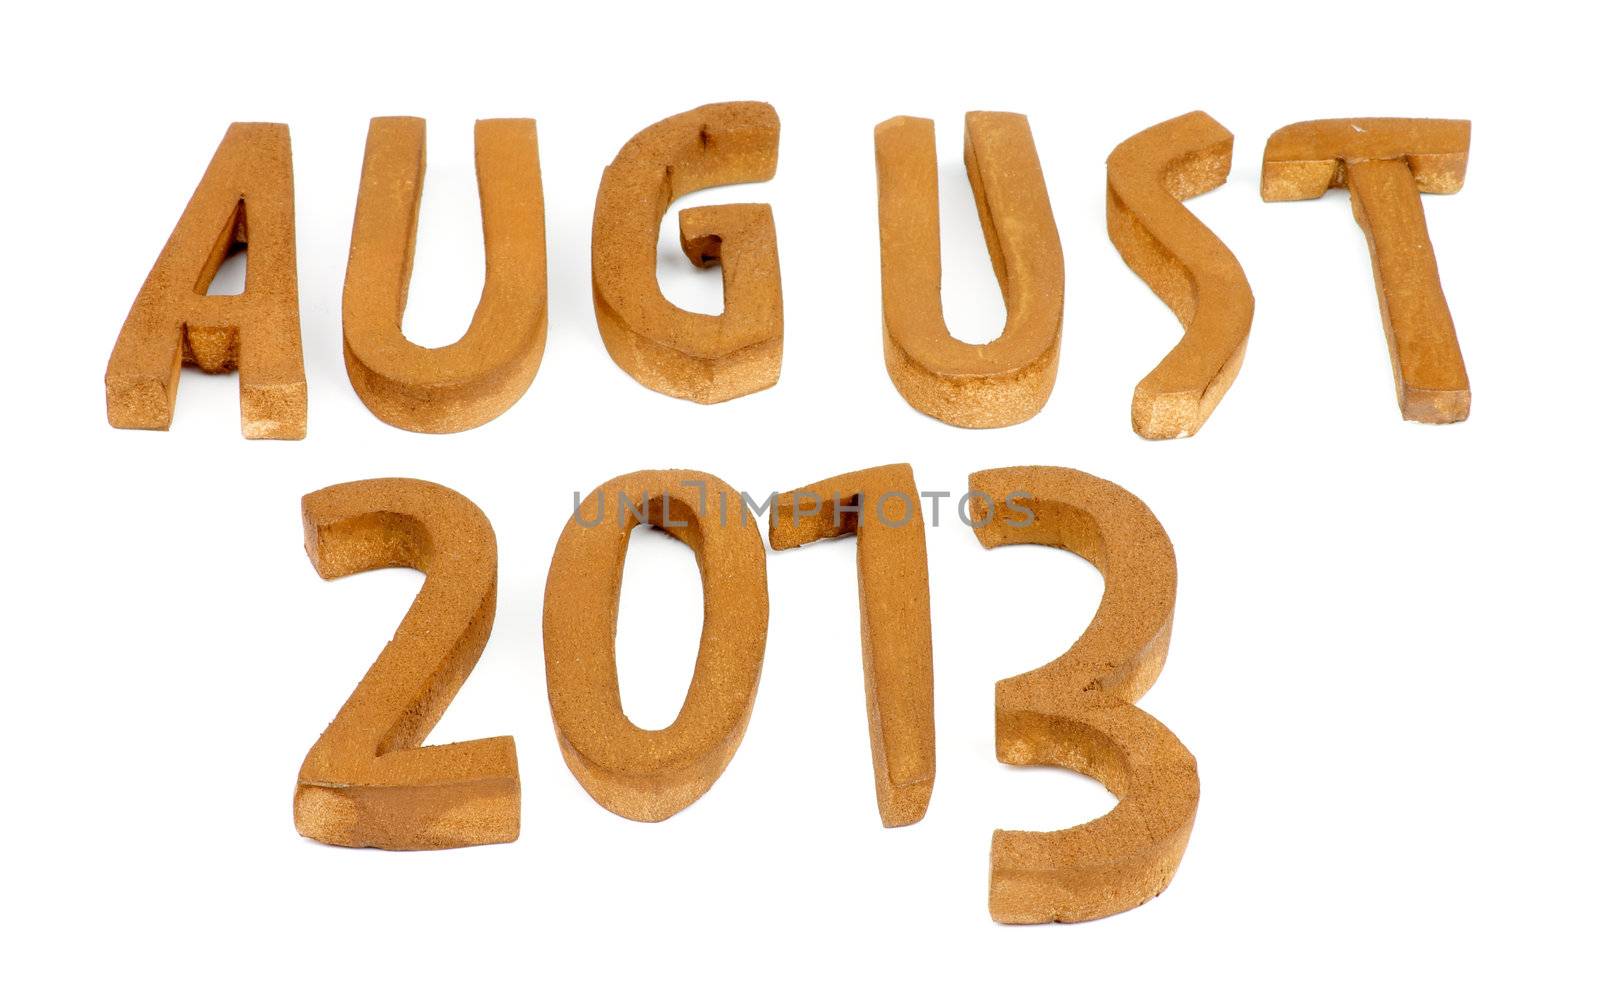 Wooden Handmade Letters "August 2013" isolated on white background